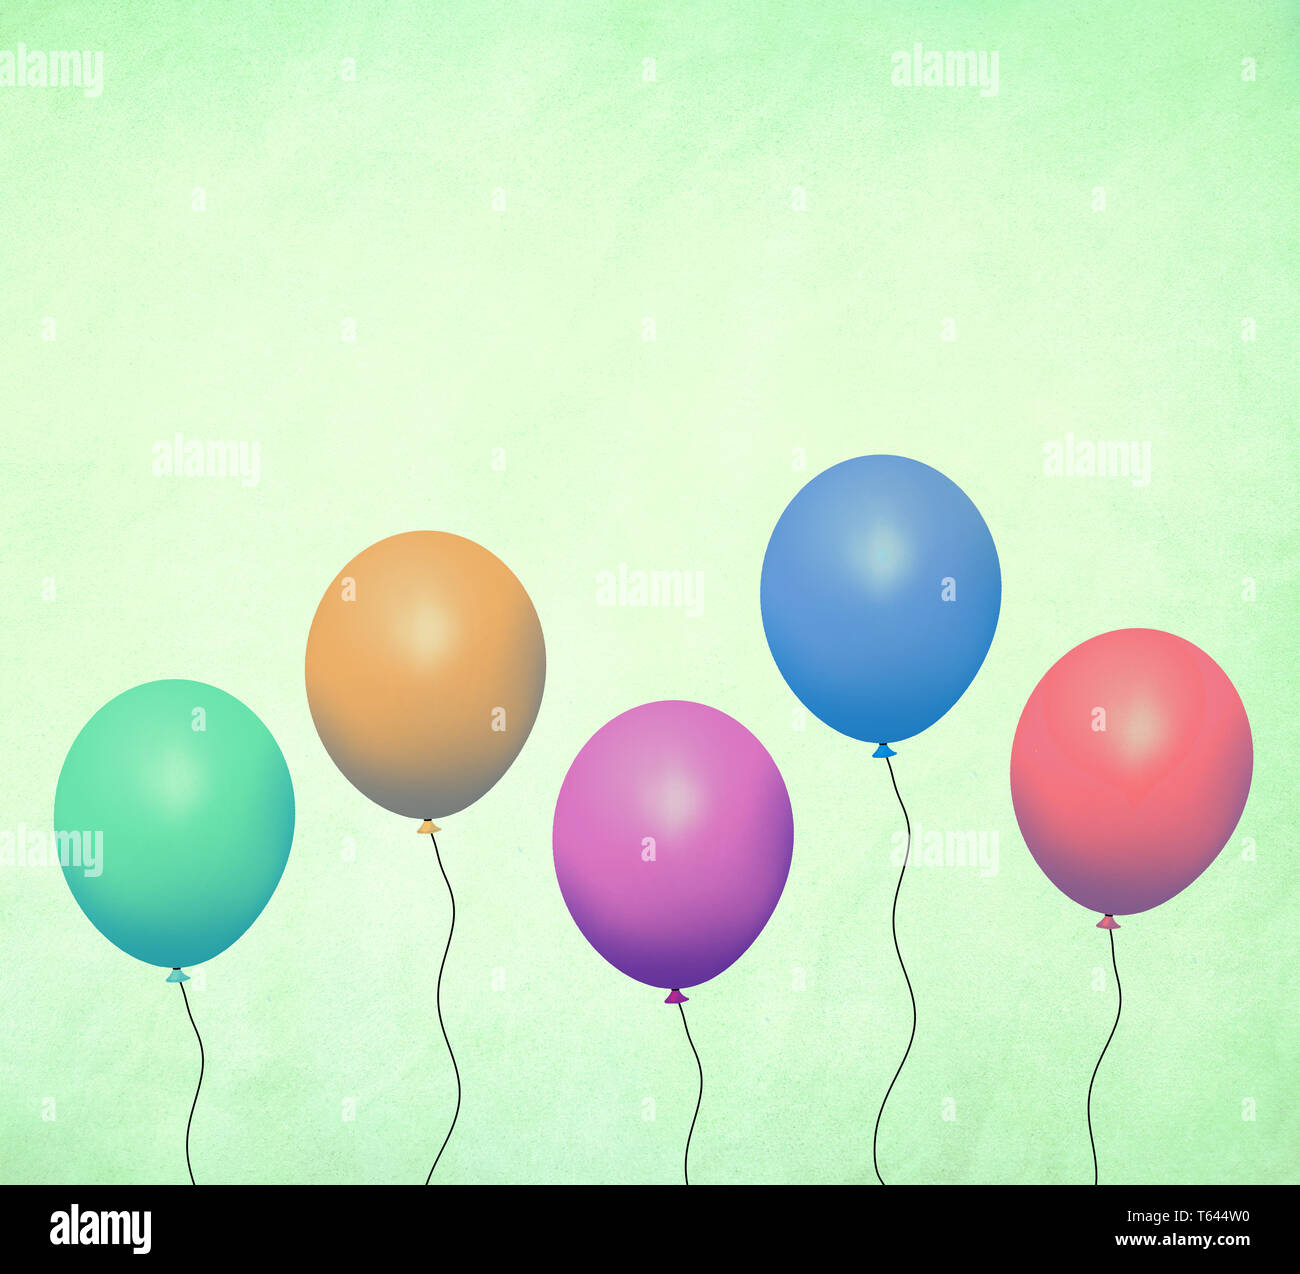 Colorful Vintage Retro Balloons on green grunge background Stock Photo